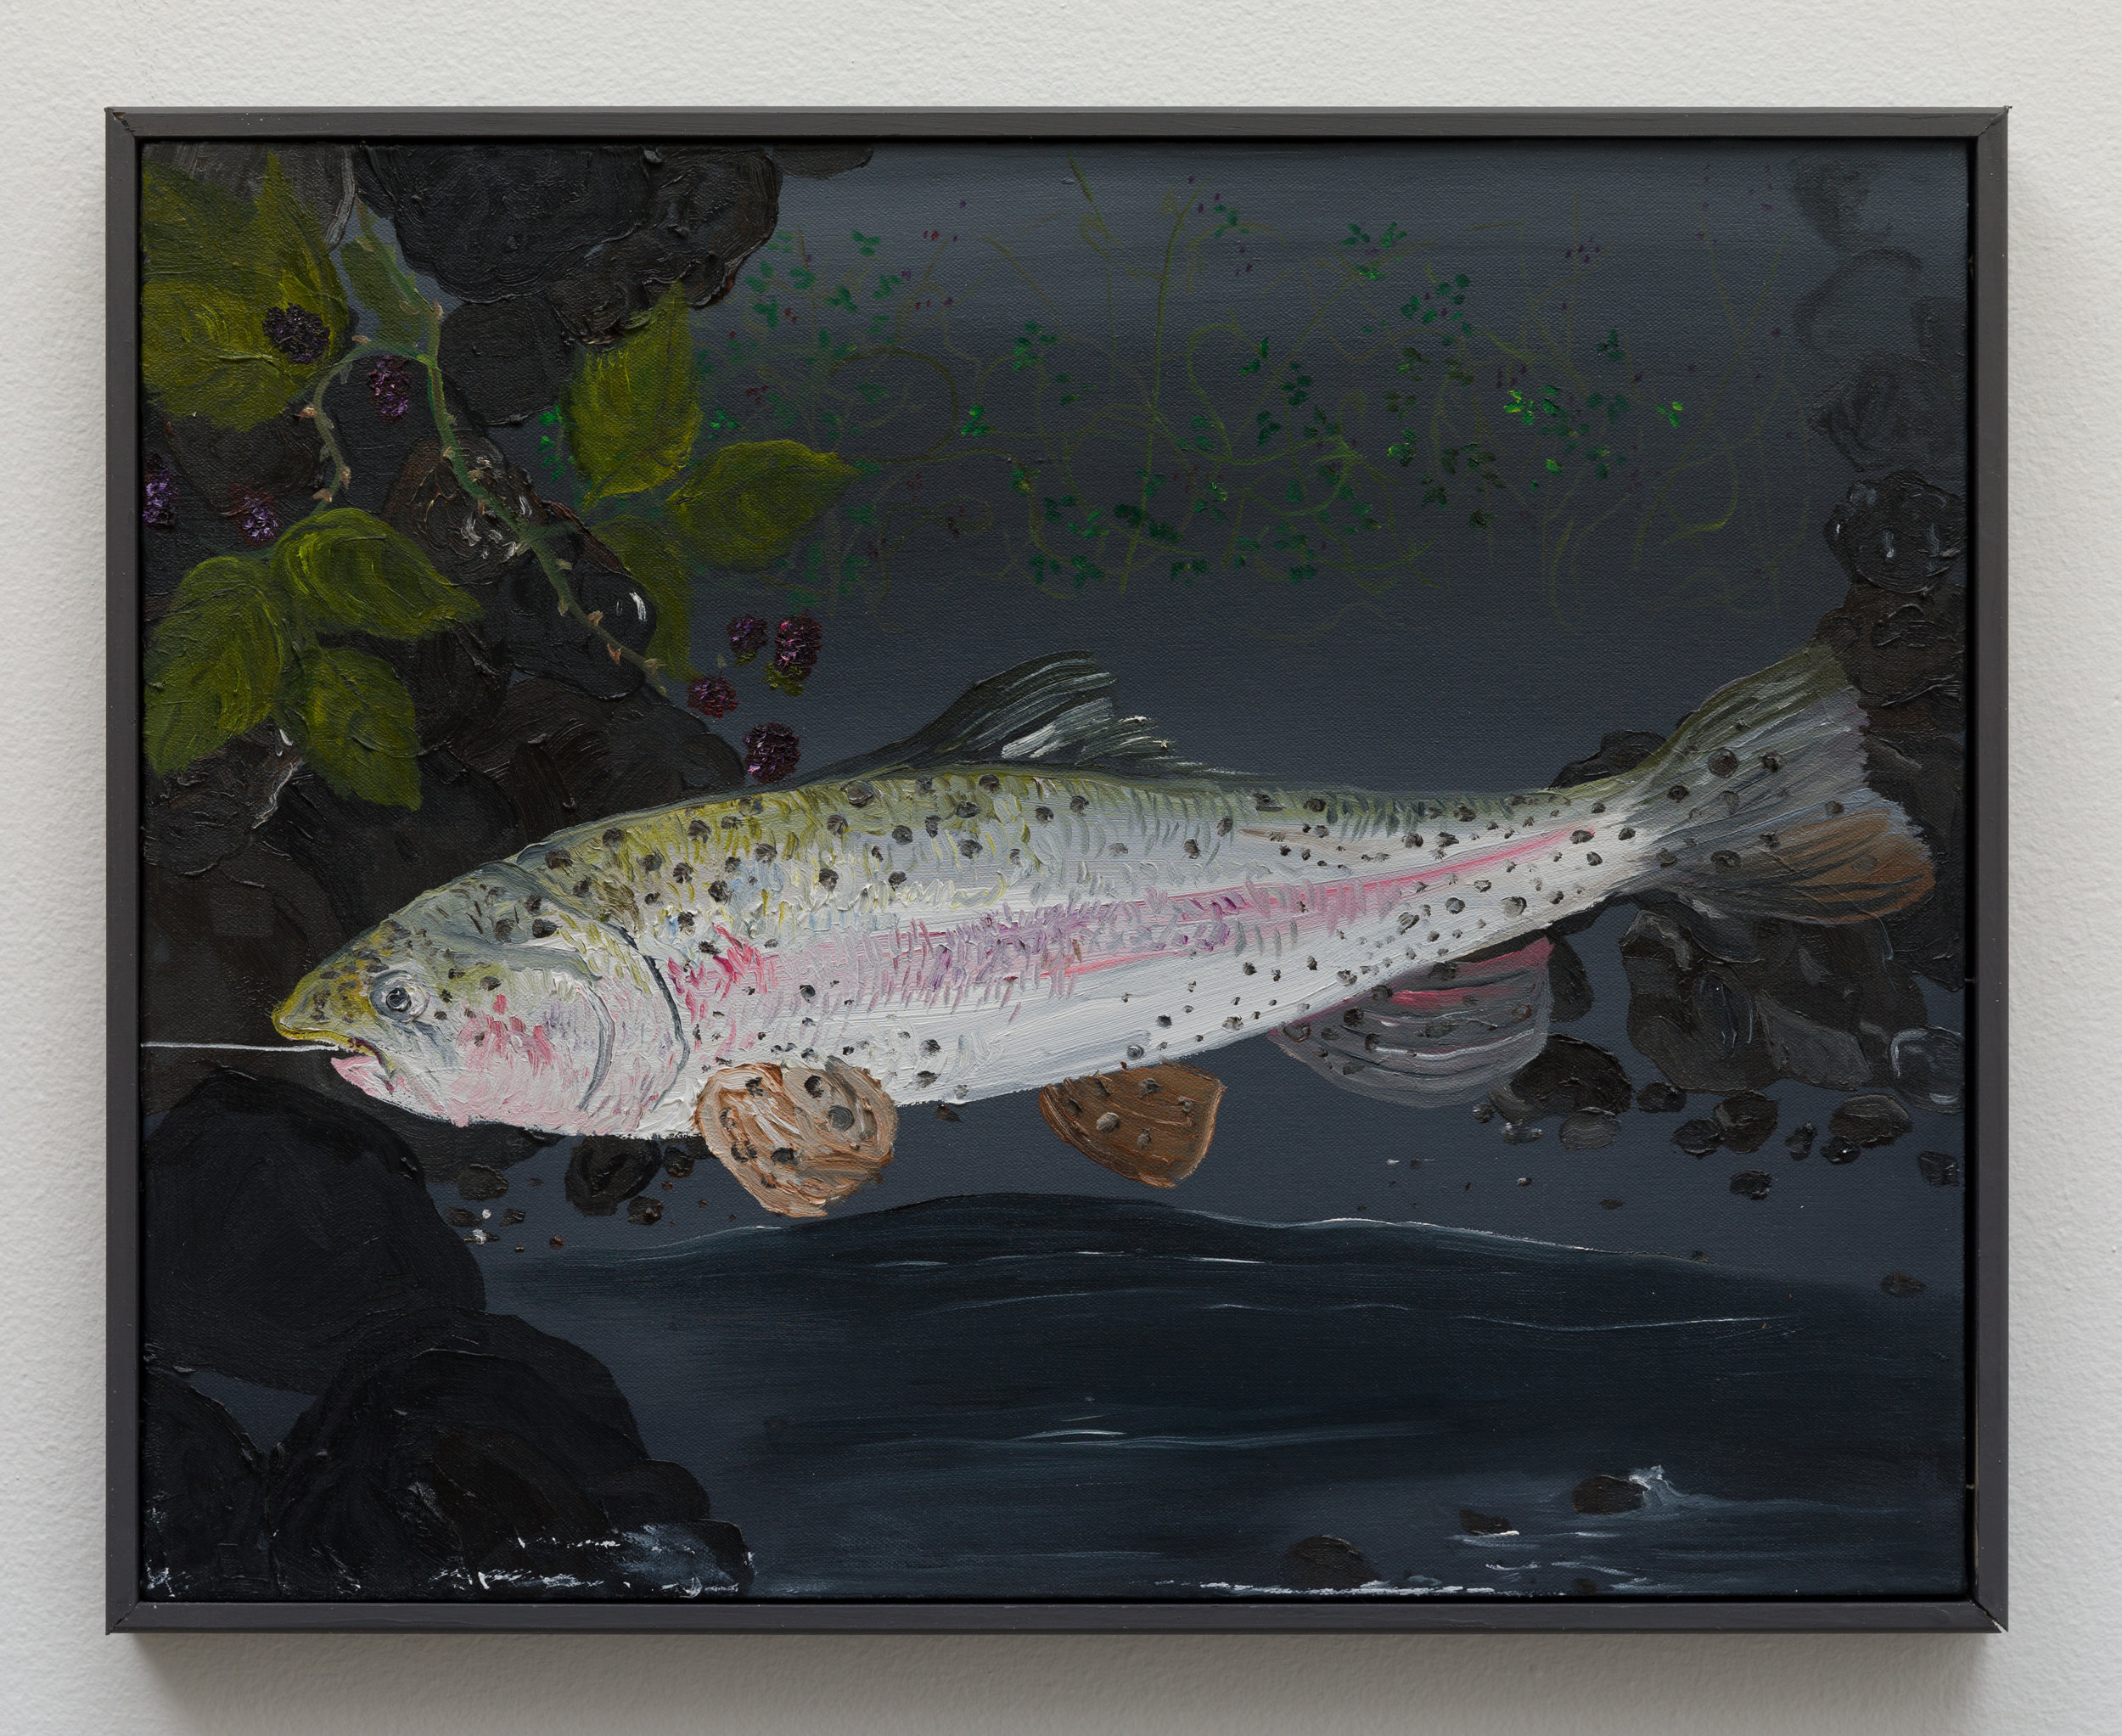 Mandalay_Still Life with Rainbow Trout and Black Berries_2018_MM004.jpg